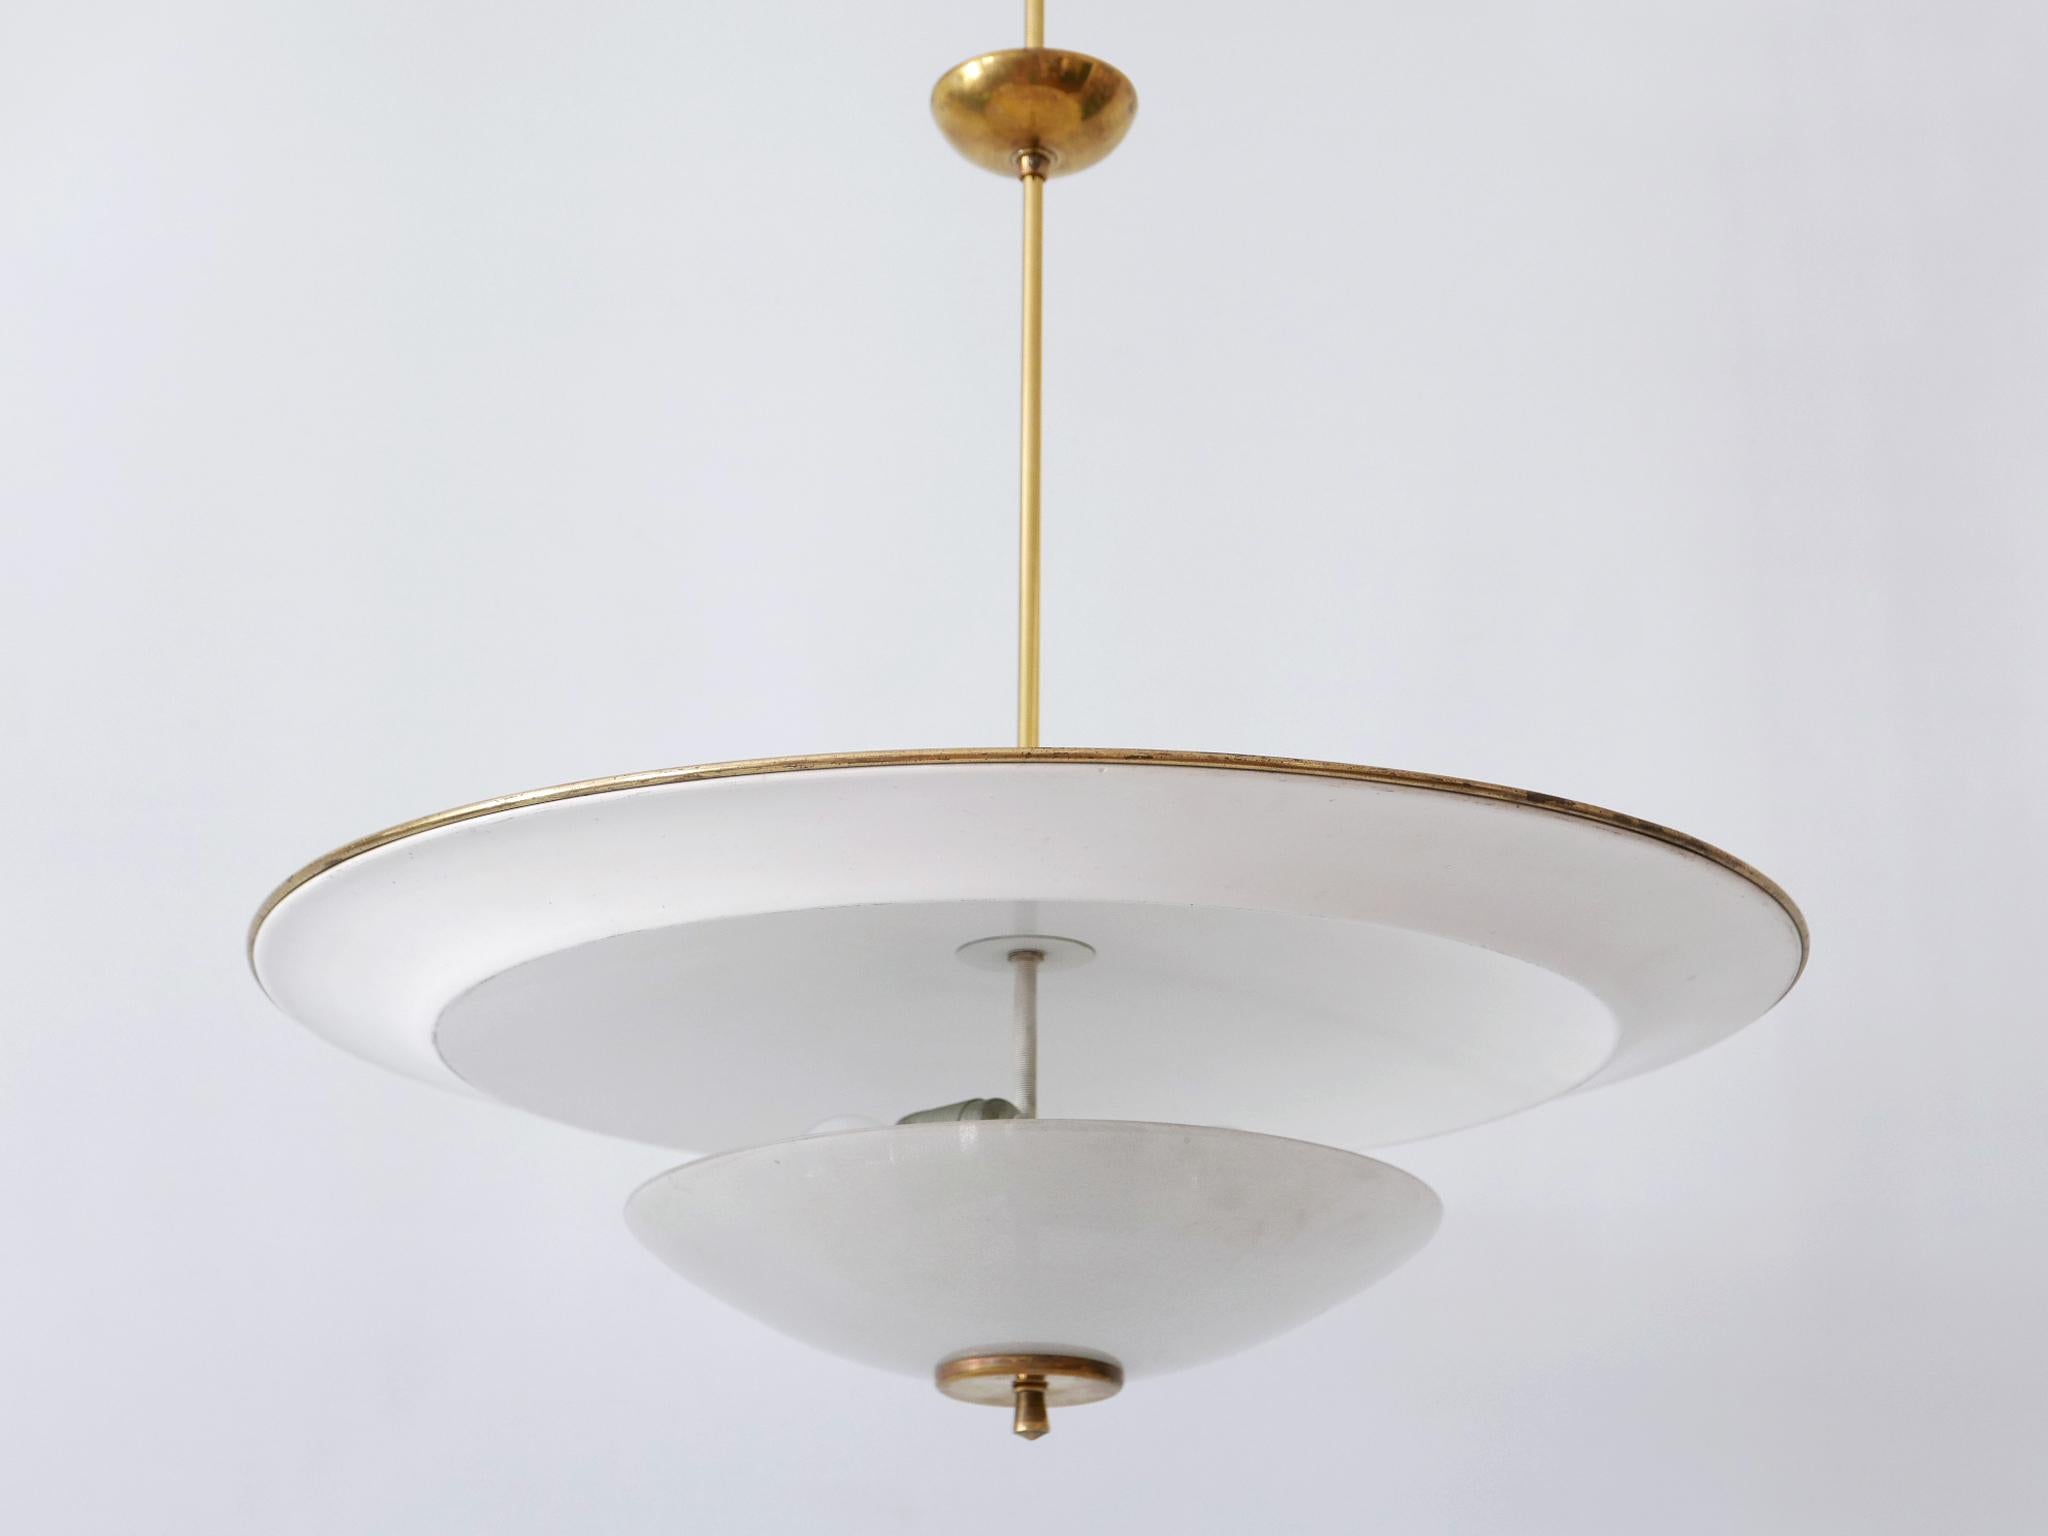 Large Mid-Century Modern 'Ufo' Ceiling Light or Pendant Lamp Germany 1950s № 2 For Sale 6